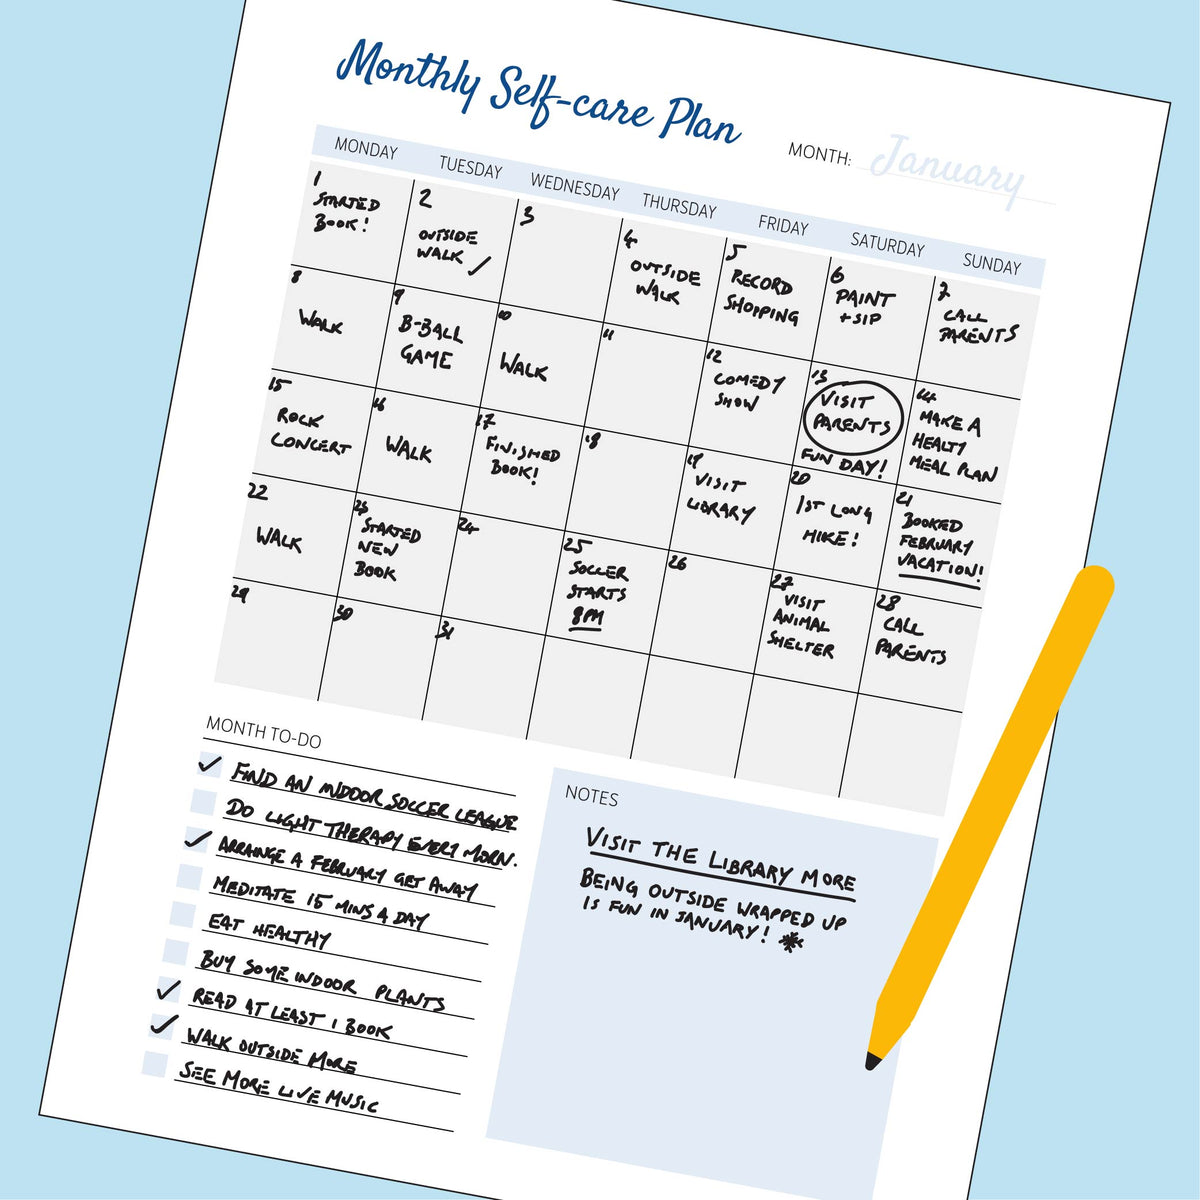 Monthly Self-Care Plan